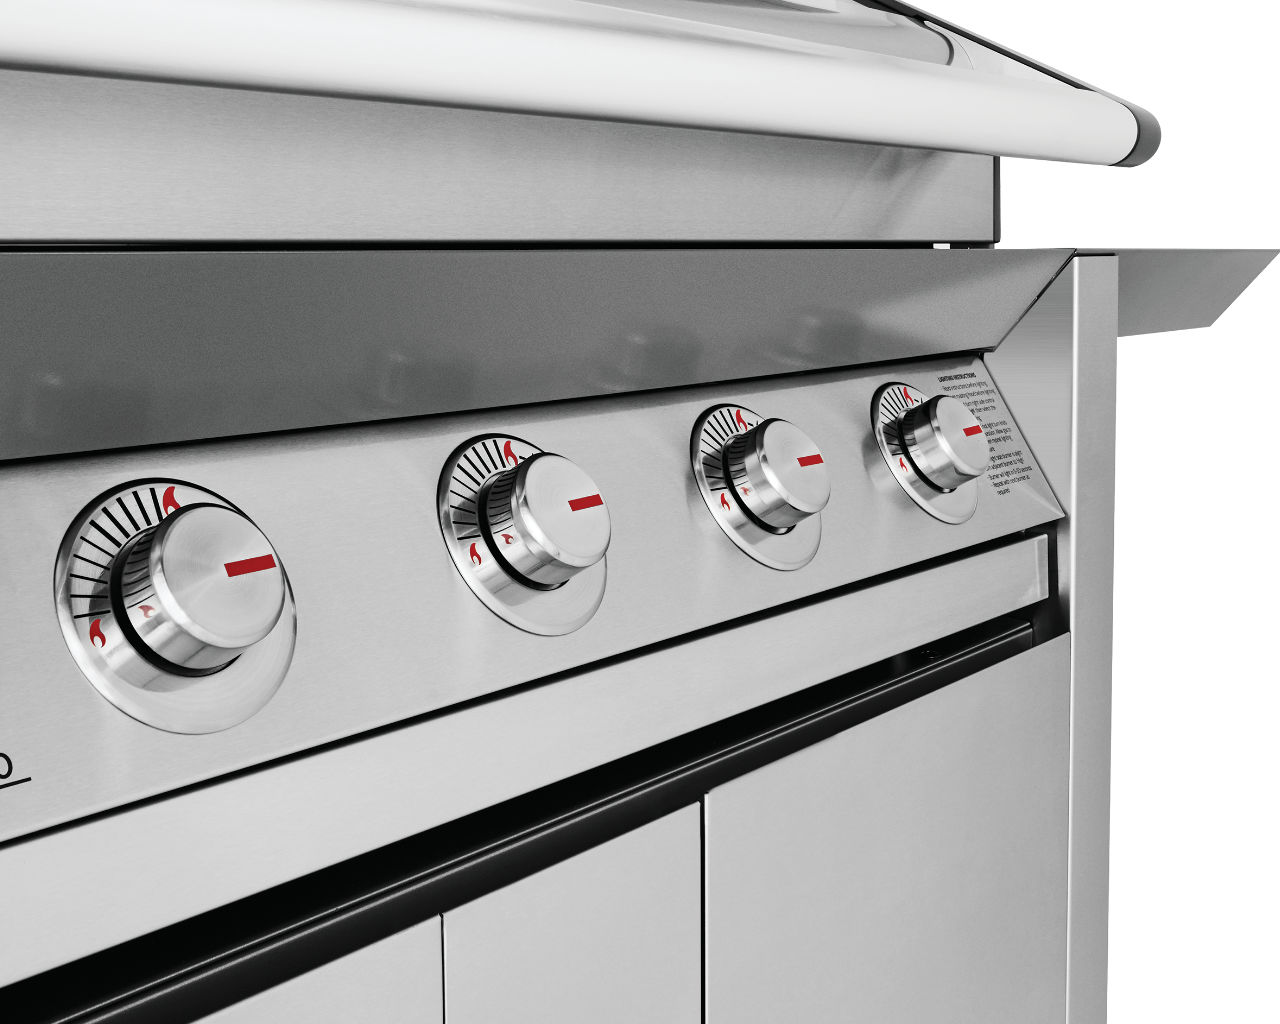 BeefEater 1600 Series - 5 Burner Stainless Steel BBQ With Side Burner (Silver), , hi-res image number null